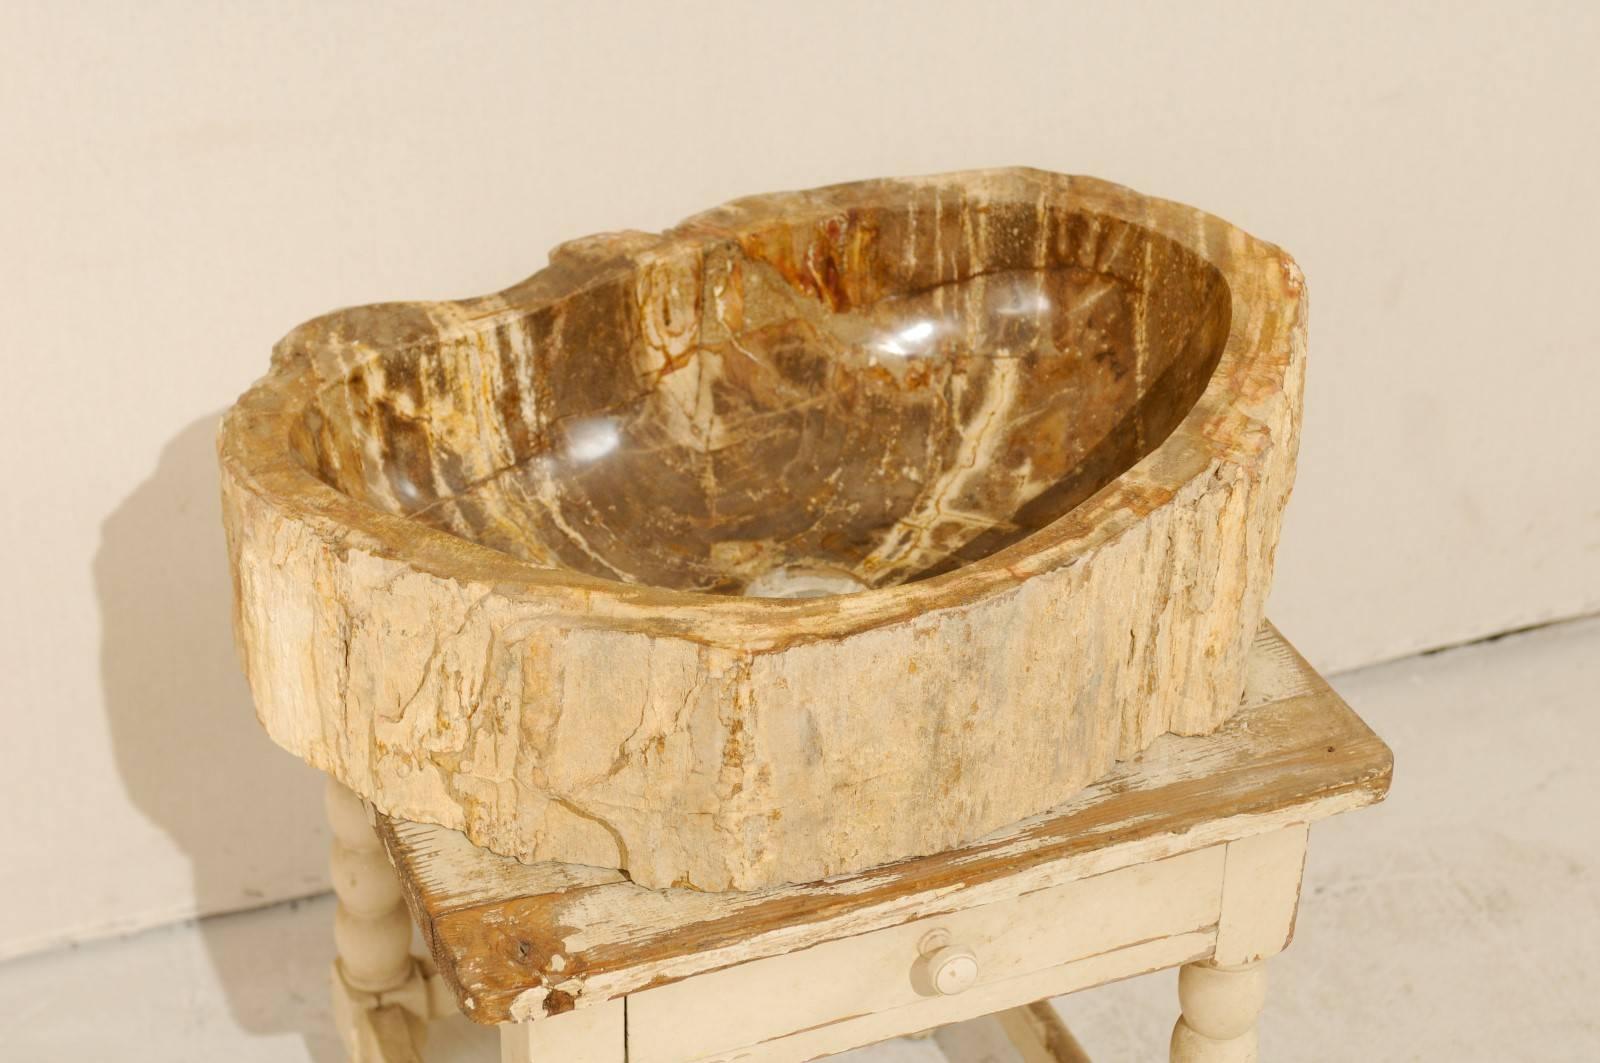 A petrified wood sink. This petrified wood sink has more of an oval shape with a flatter back-side. The colors are primarily in brown, beige and cream tones, with cream/beige being the prominent exterior surround color, and brown with lighter